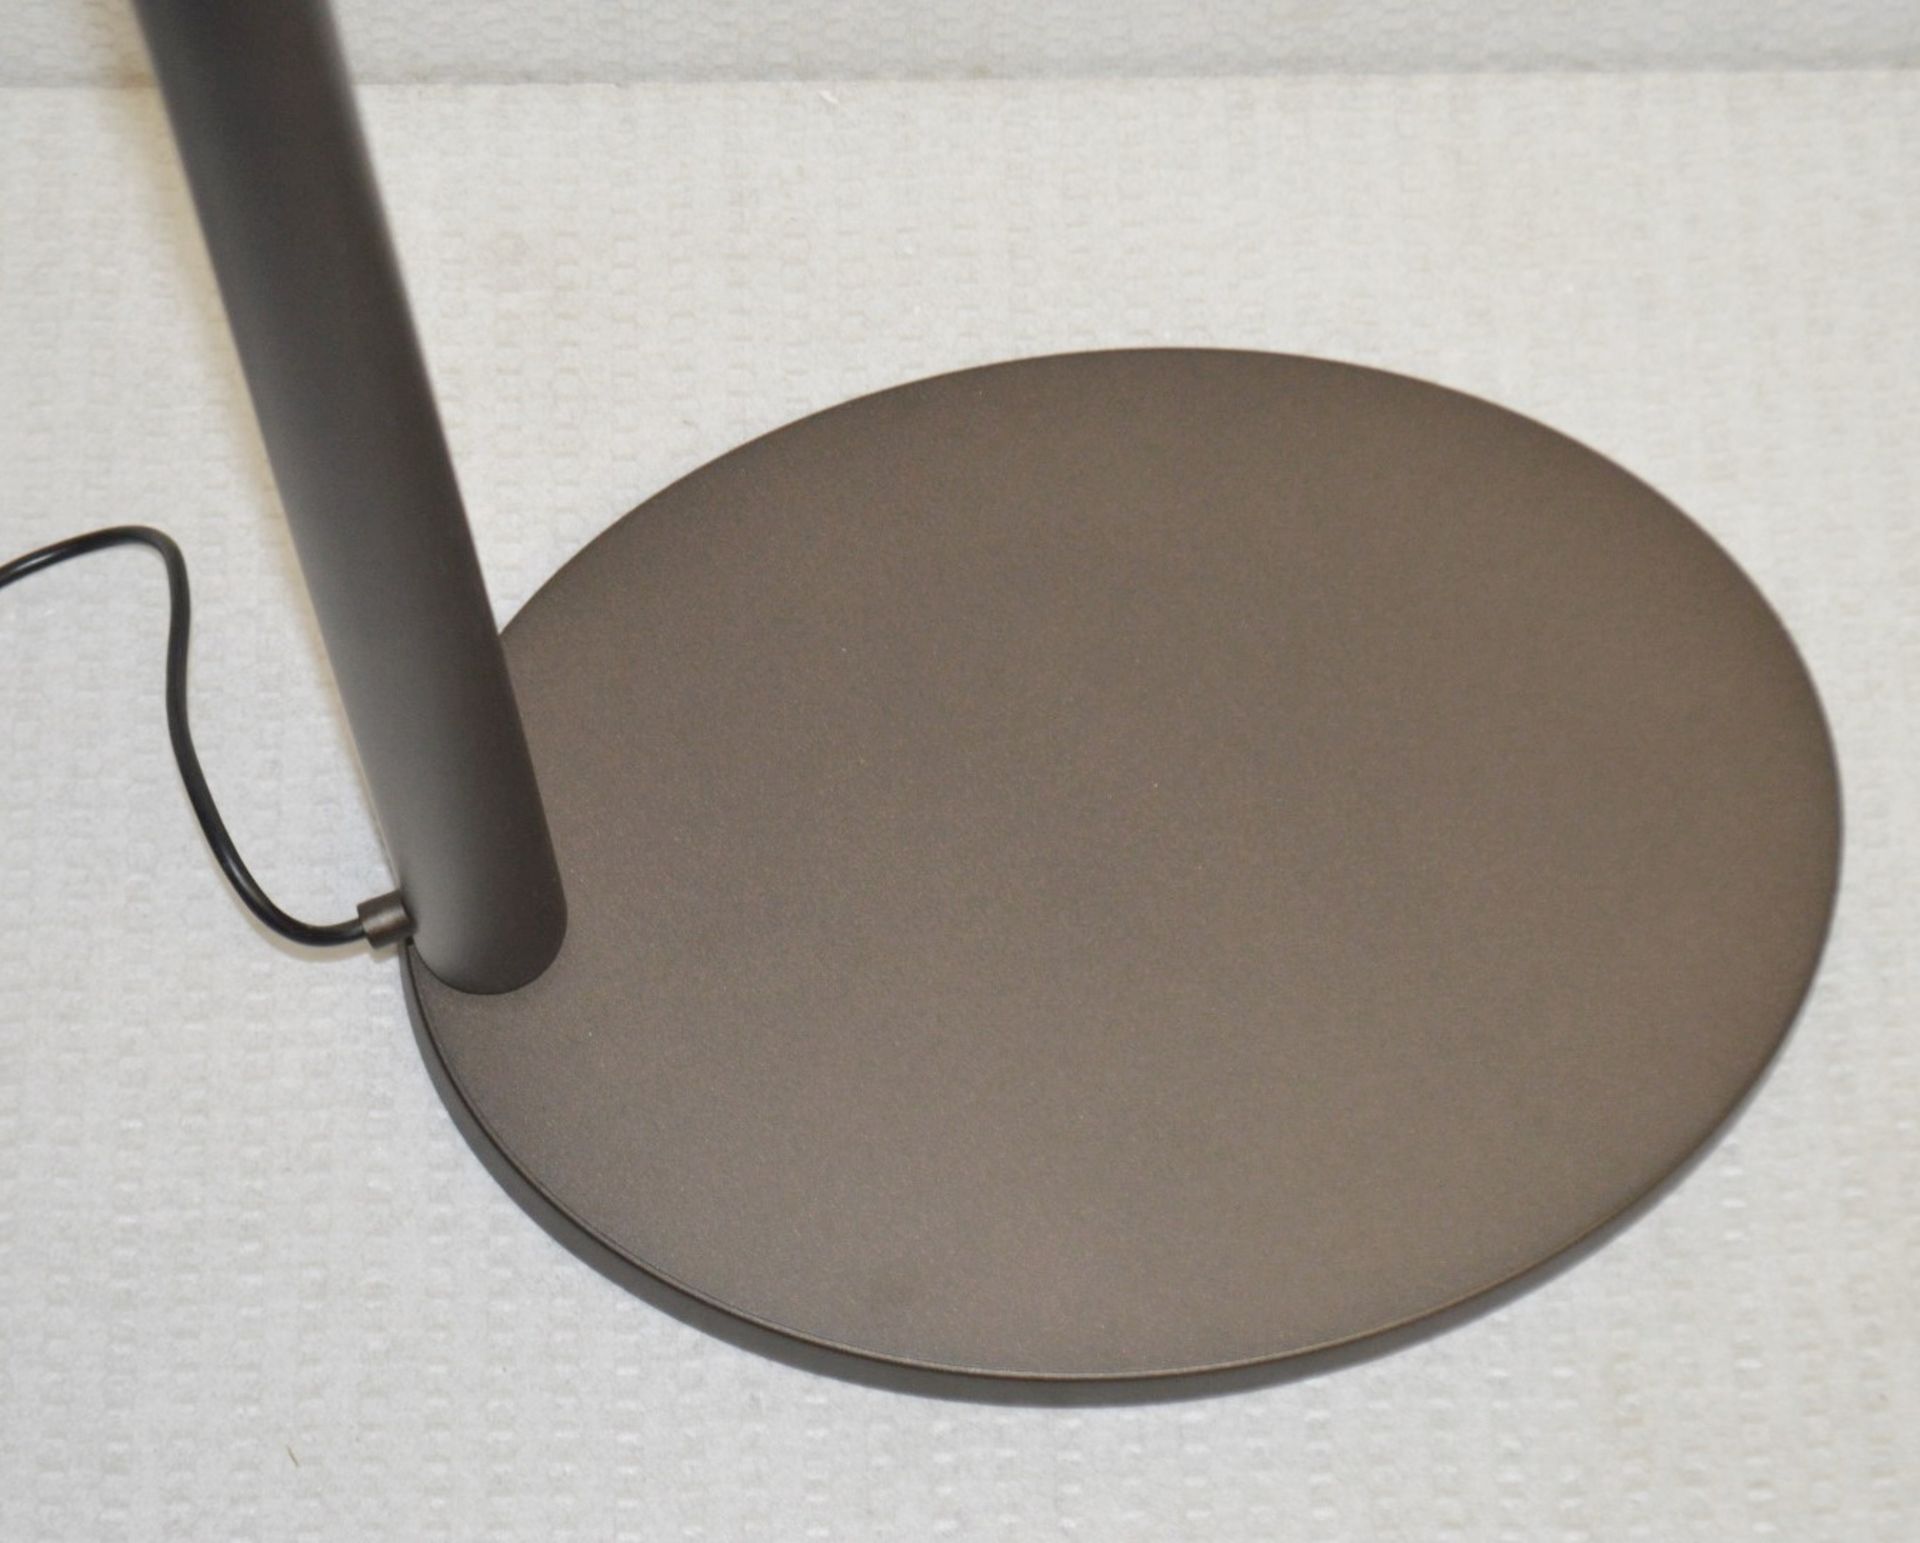 1 x CHELSOM Freestanding Floor Lamp In A Black Bronze Finish With Stylish Oval Base - Unused Boxed - Image 2 of 5